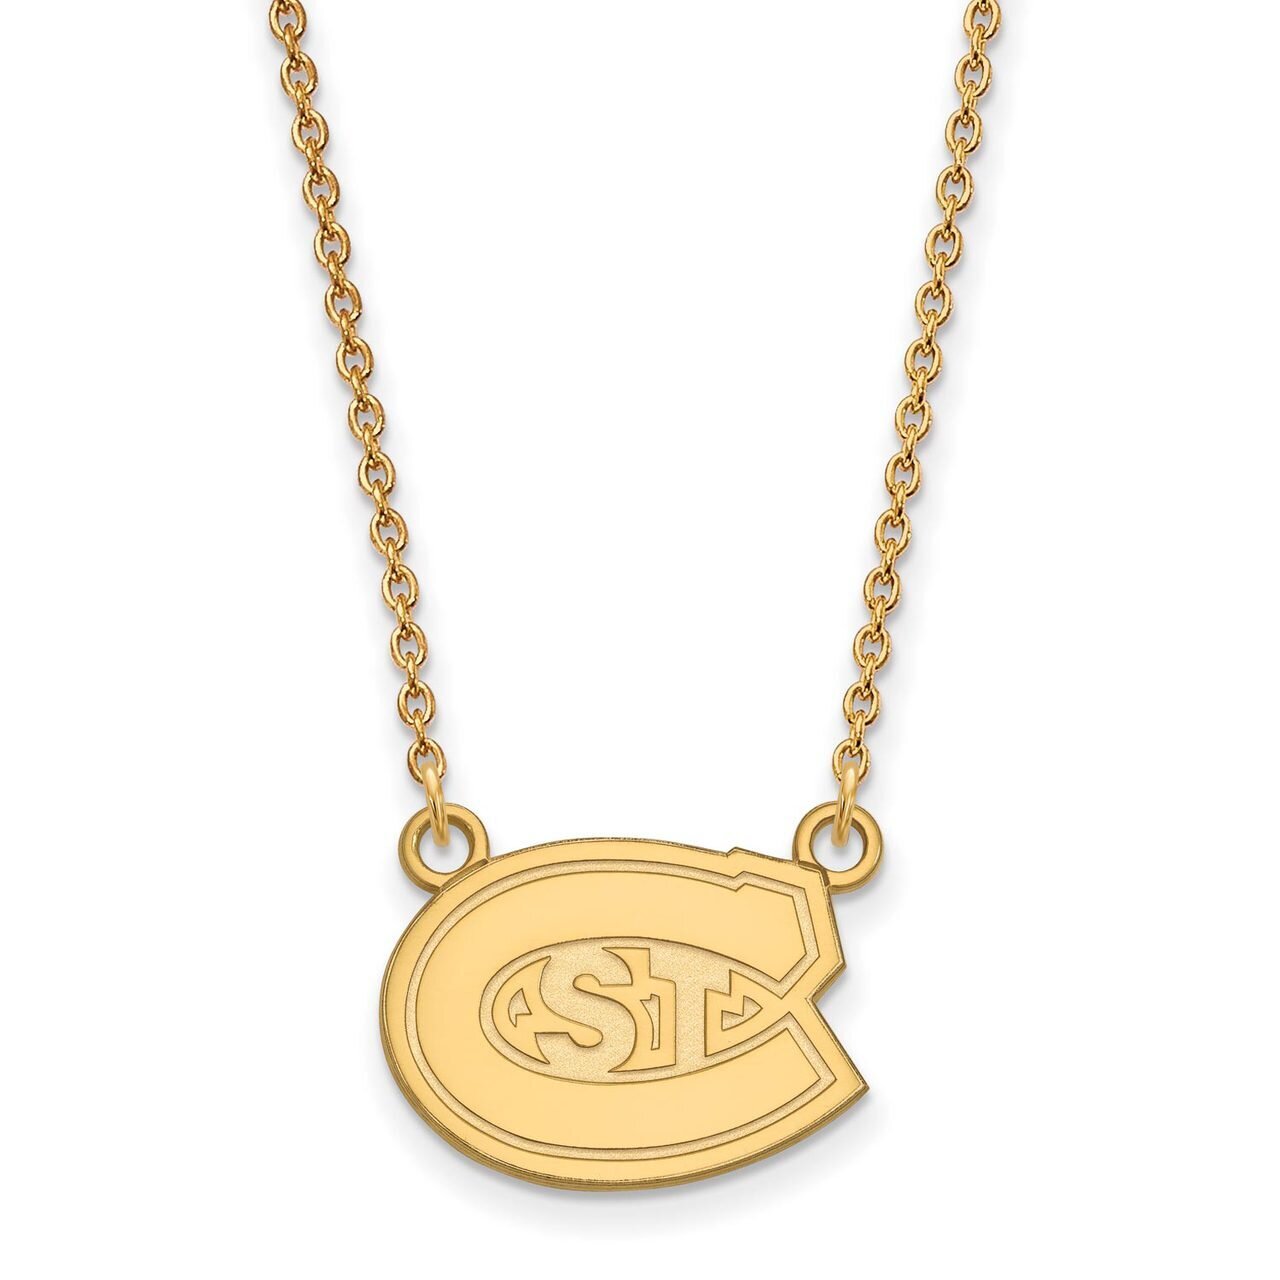 Saint Cloud State Small Pendant with Chain Necklace 14k Yellow Gold 4Y008STC-18